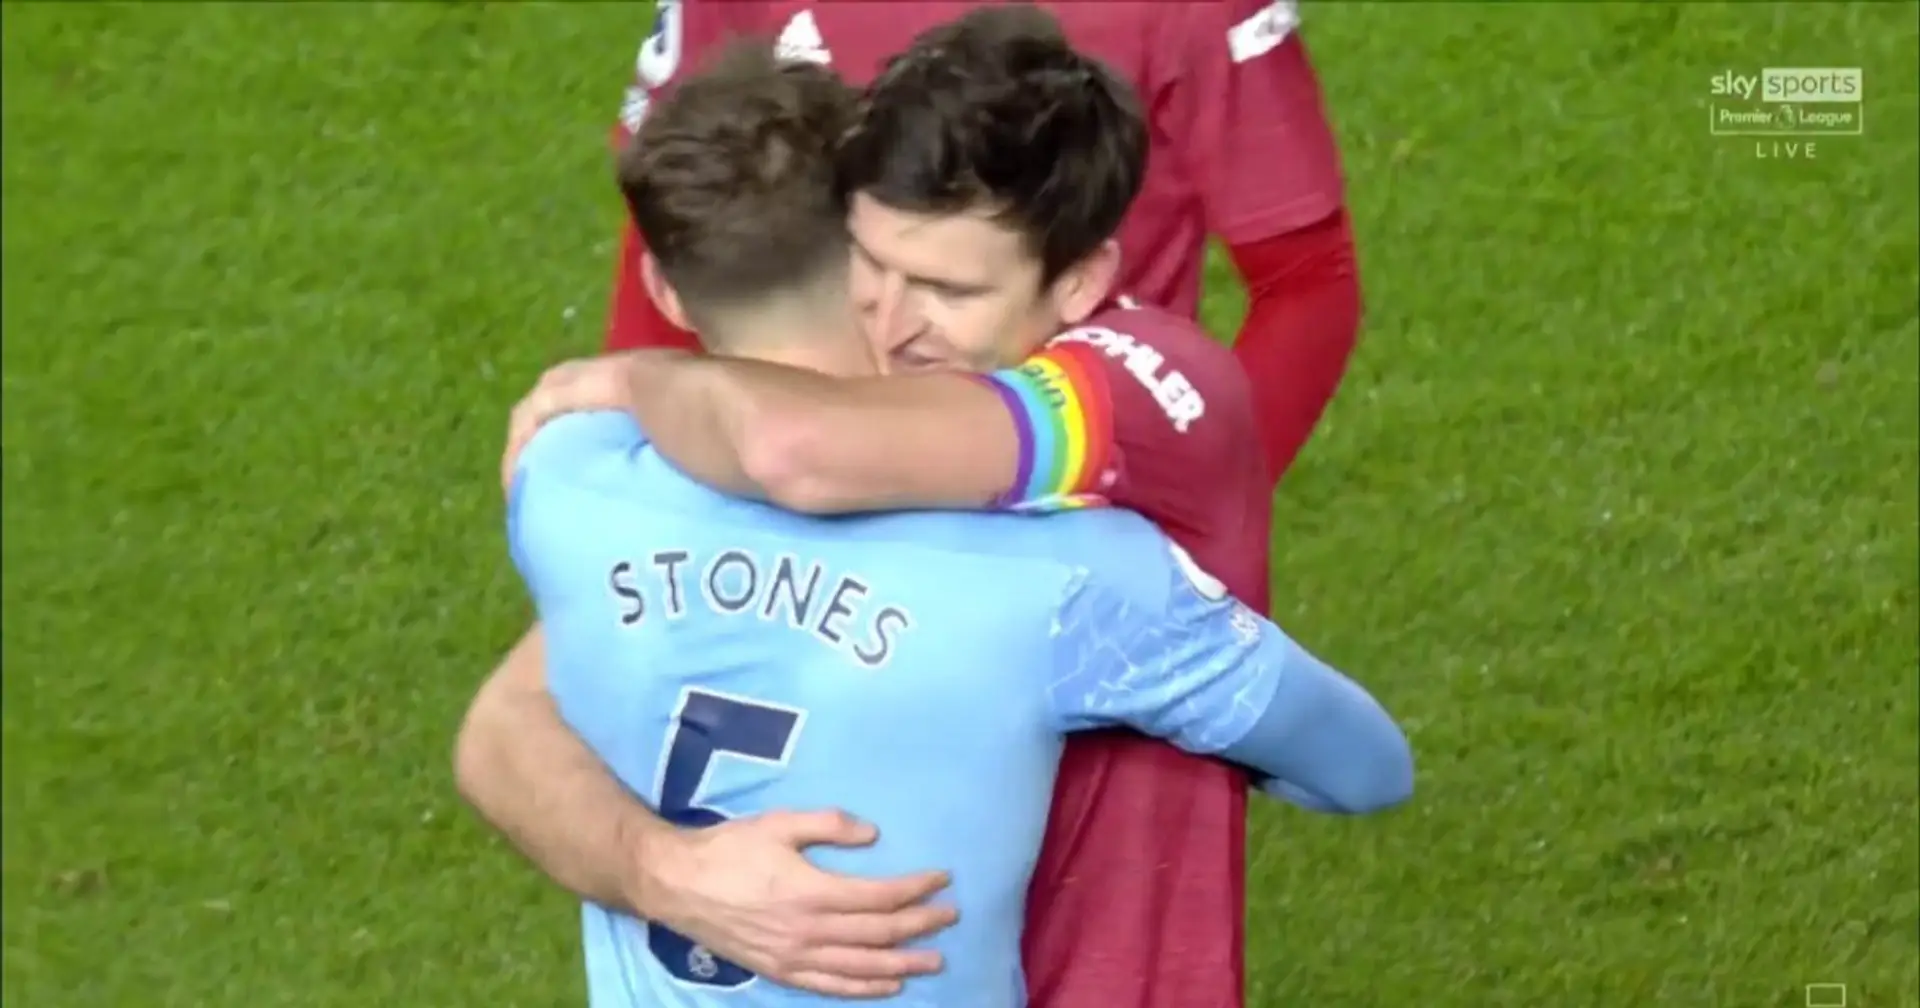 Troy Deeney on Maguire-Stones post-match hug: 'I don't really see a massive deal with it'